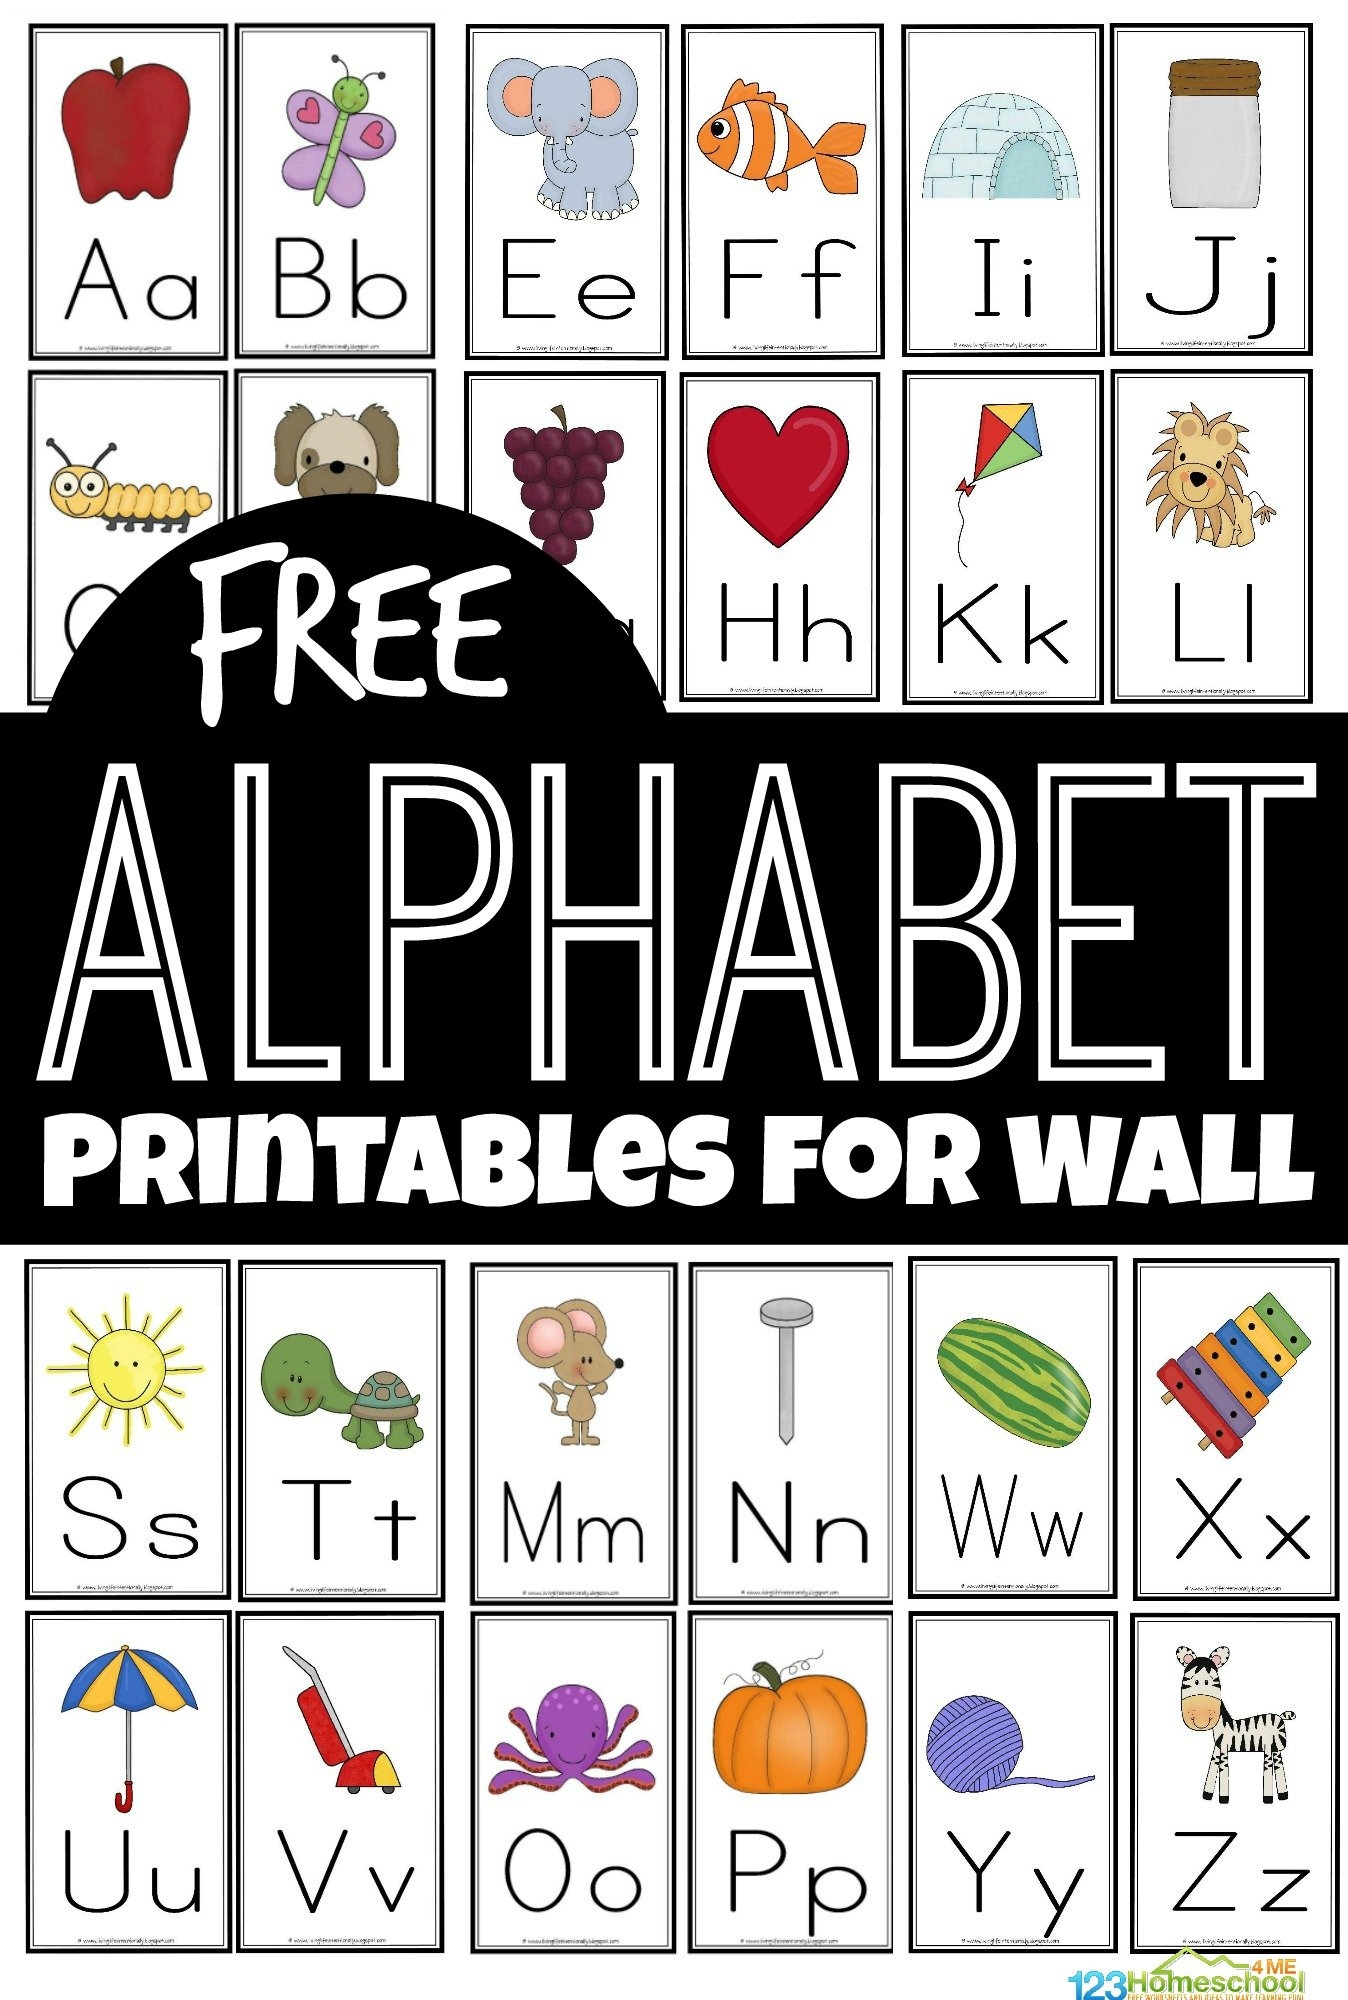 FREE Alphabet Flashcards And Printables For Wall - Free Printable Abc Flashcards With Pictures